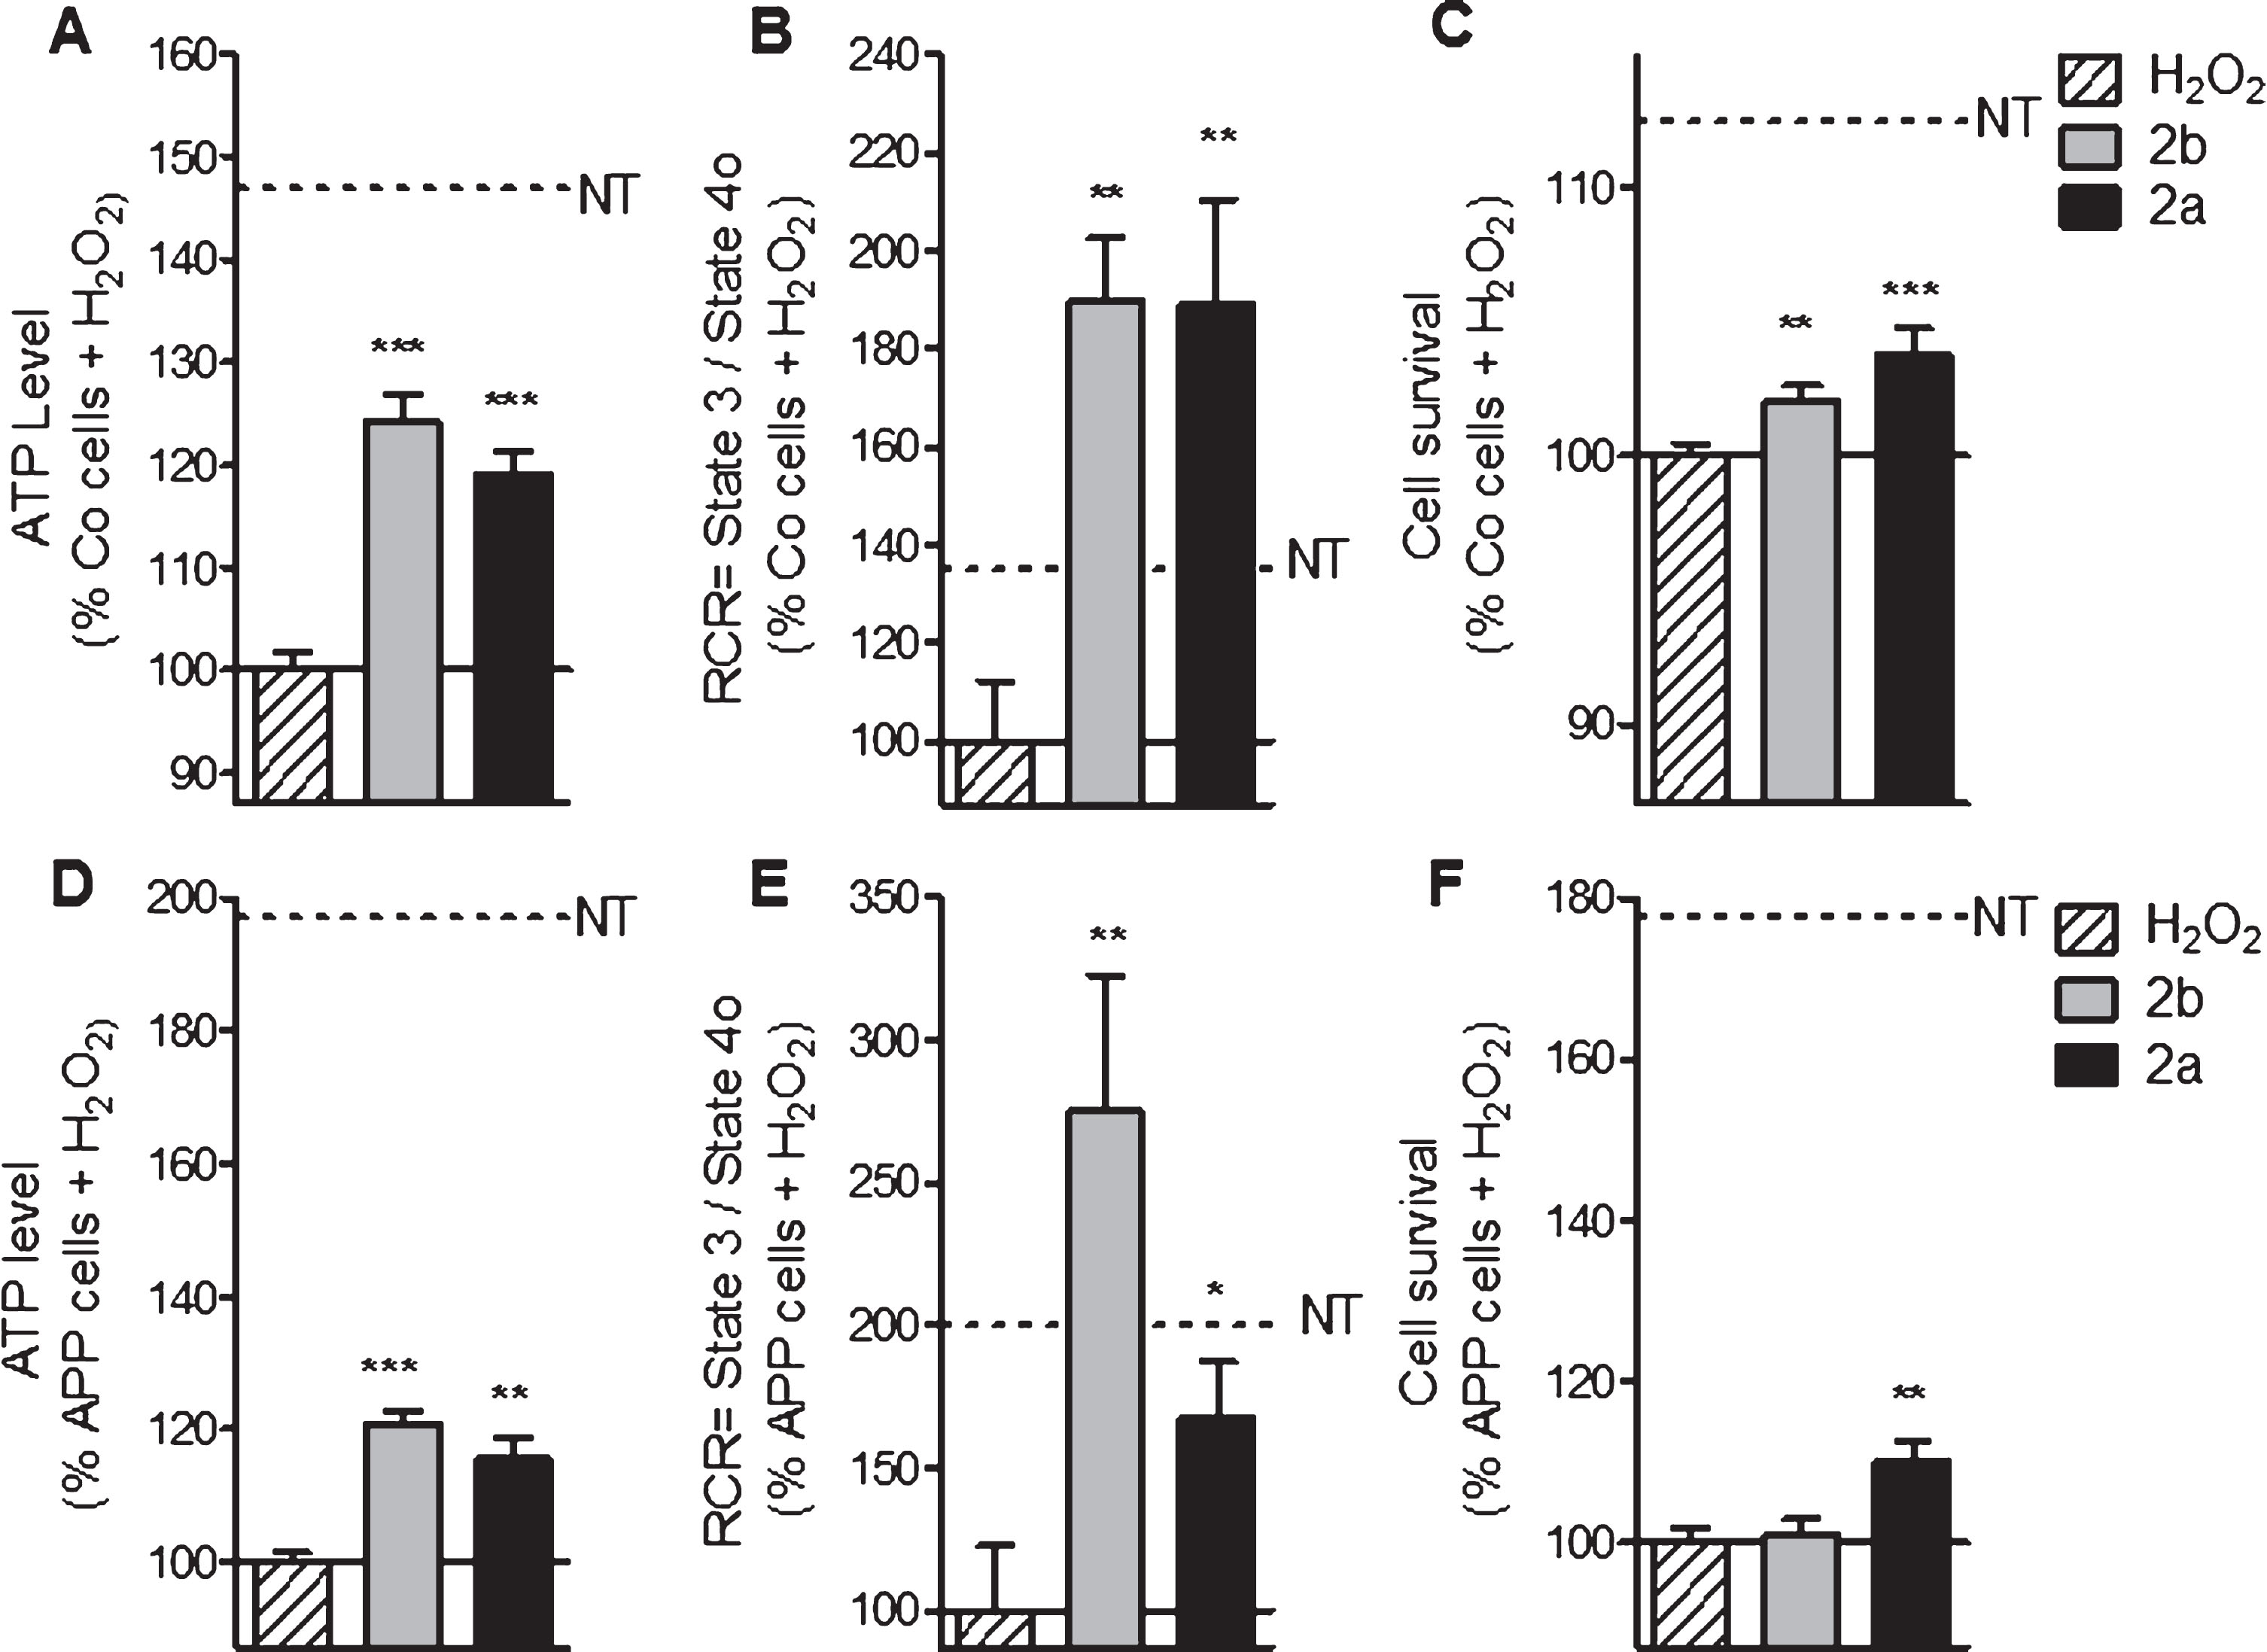 2a and 2b pre-treatment ameliorate ATP levels, mitochondrial respiration (RCR) and cell survival after oxidative insult in control (Co) and APP cells. Co and APP cells were pre-treated with the TSPO ligand 2b or 2a for 24 h and then exposed to H2O2 (500 μM for 3 h). H2O2 treatment induces a decrease of the ATP level, RCR as well as the cell survival both cell lines. The TSPO ligand 2b or 2a improved the ATP level, RCR and cell survival. Values represent the mean±SEM; n = 4–6 replicates of three independent experiments normalized to Co or APP cells treated with H2O2. One-way ANOVA and post hoc Dunnett’s multiple comparison test versus Co or APP cells treated with H2O2, *p < 0.05, **p < 0.0001, ***p < 0.001.